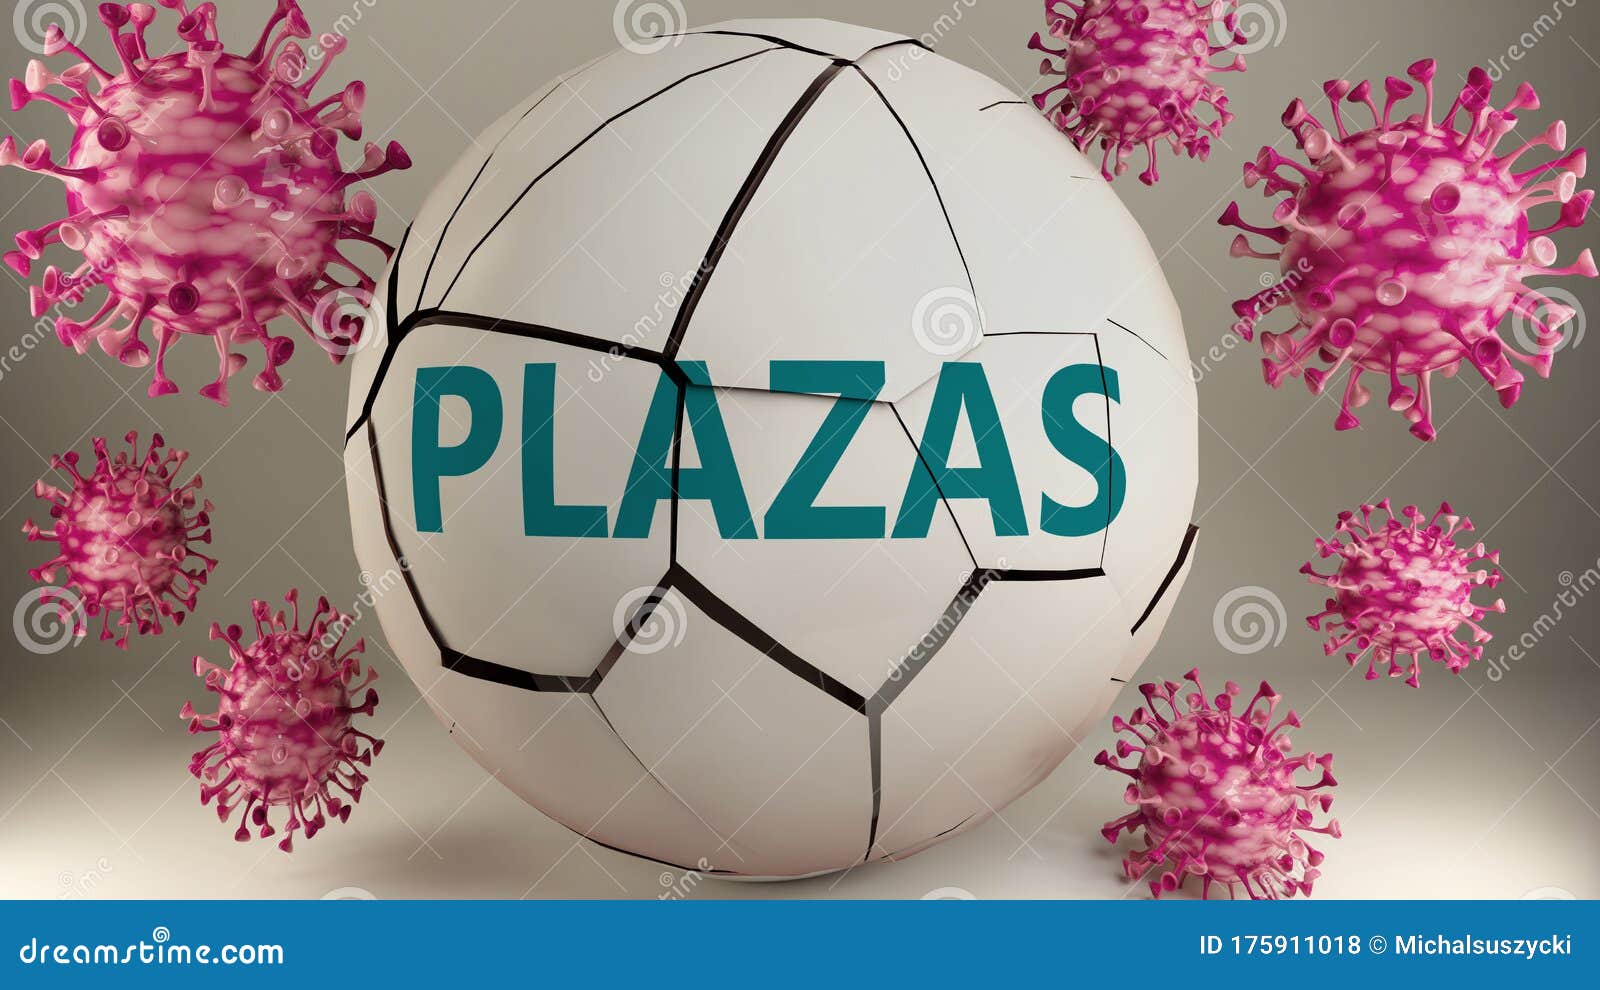 covid-19 and plazas, ized by viruses destroying word plazas to picture that coronavirus pandemic affects plazas in a very